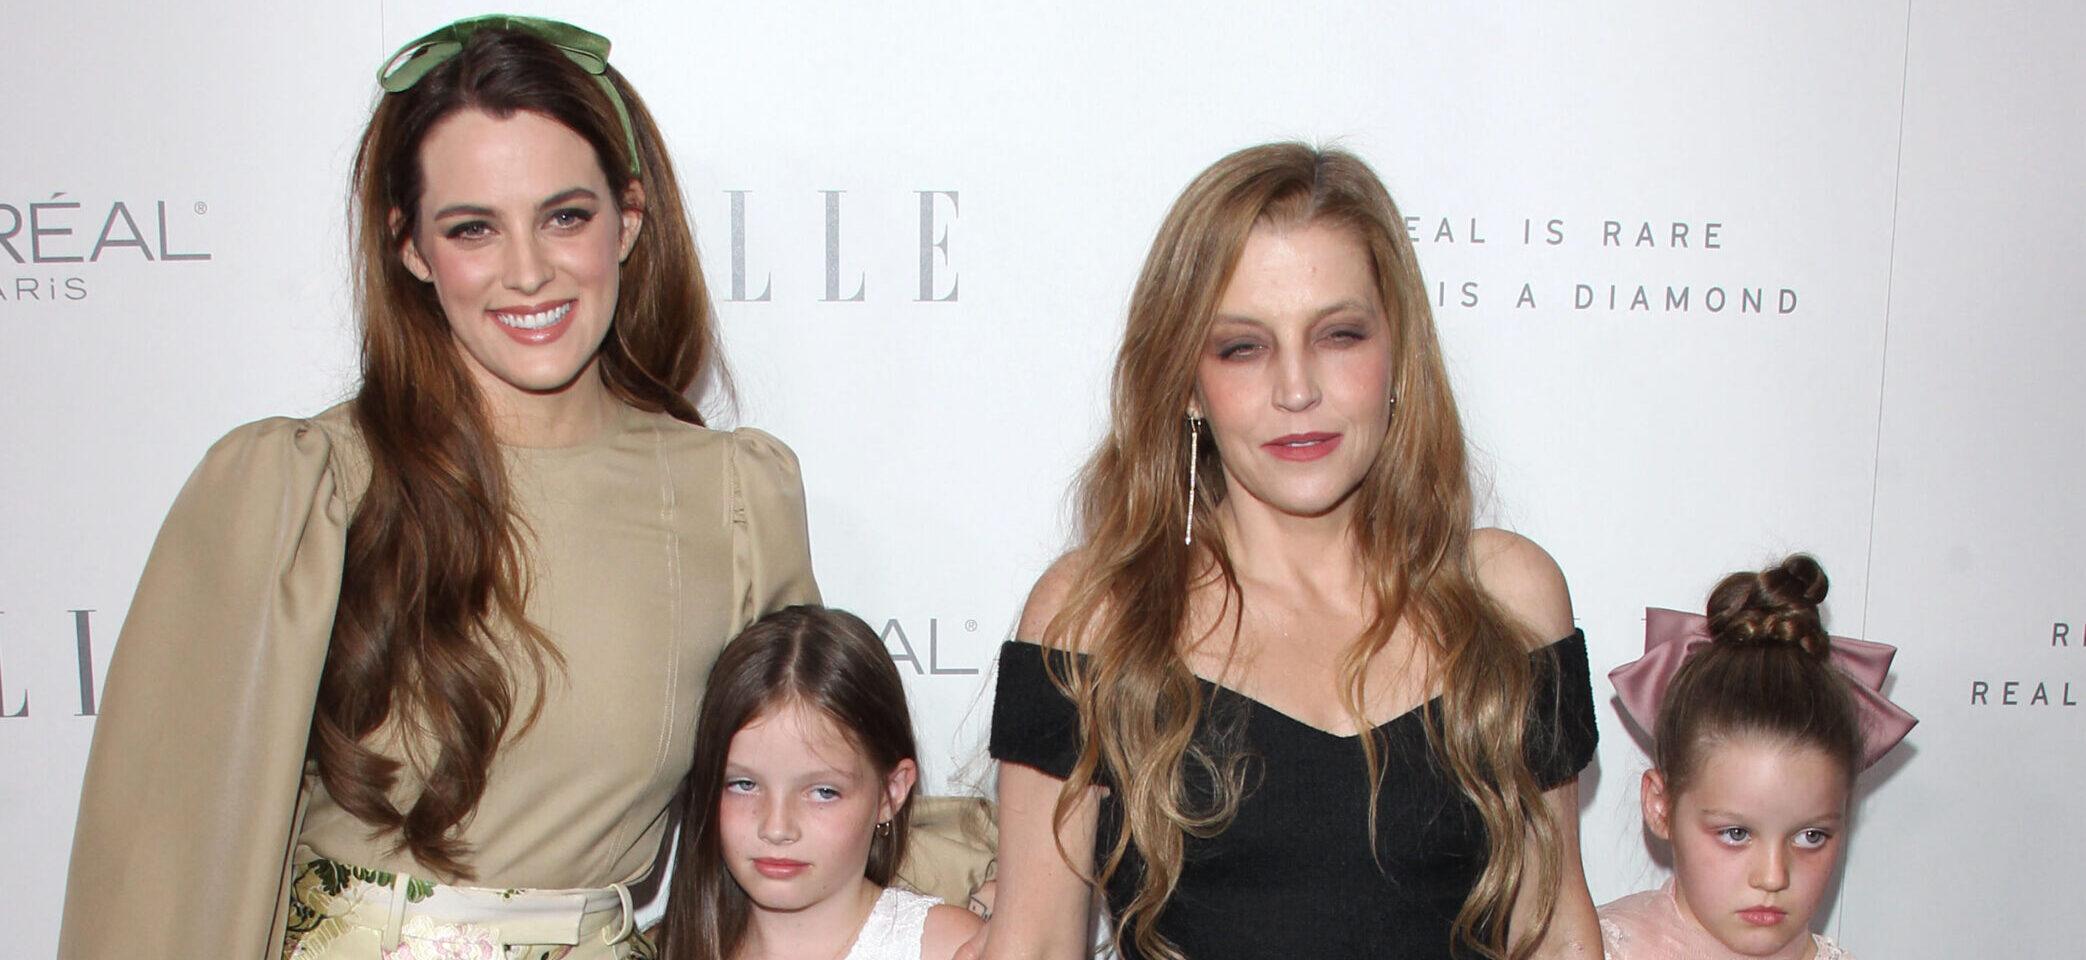 Lisa Marie Presley with daughters Riley Keough, Finley and Harper Lockwood at the NARM Music Biz Awards